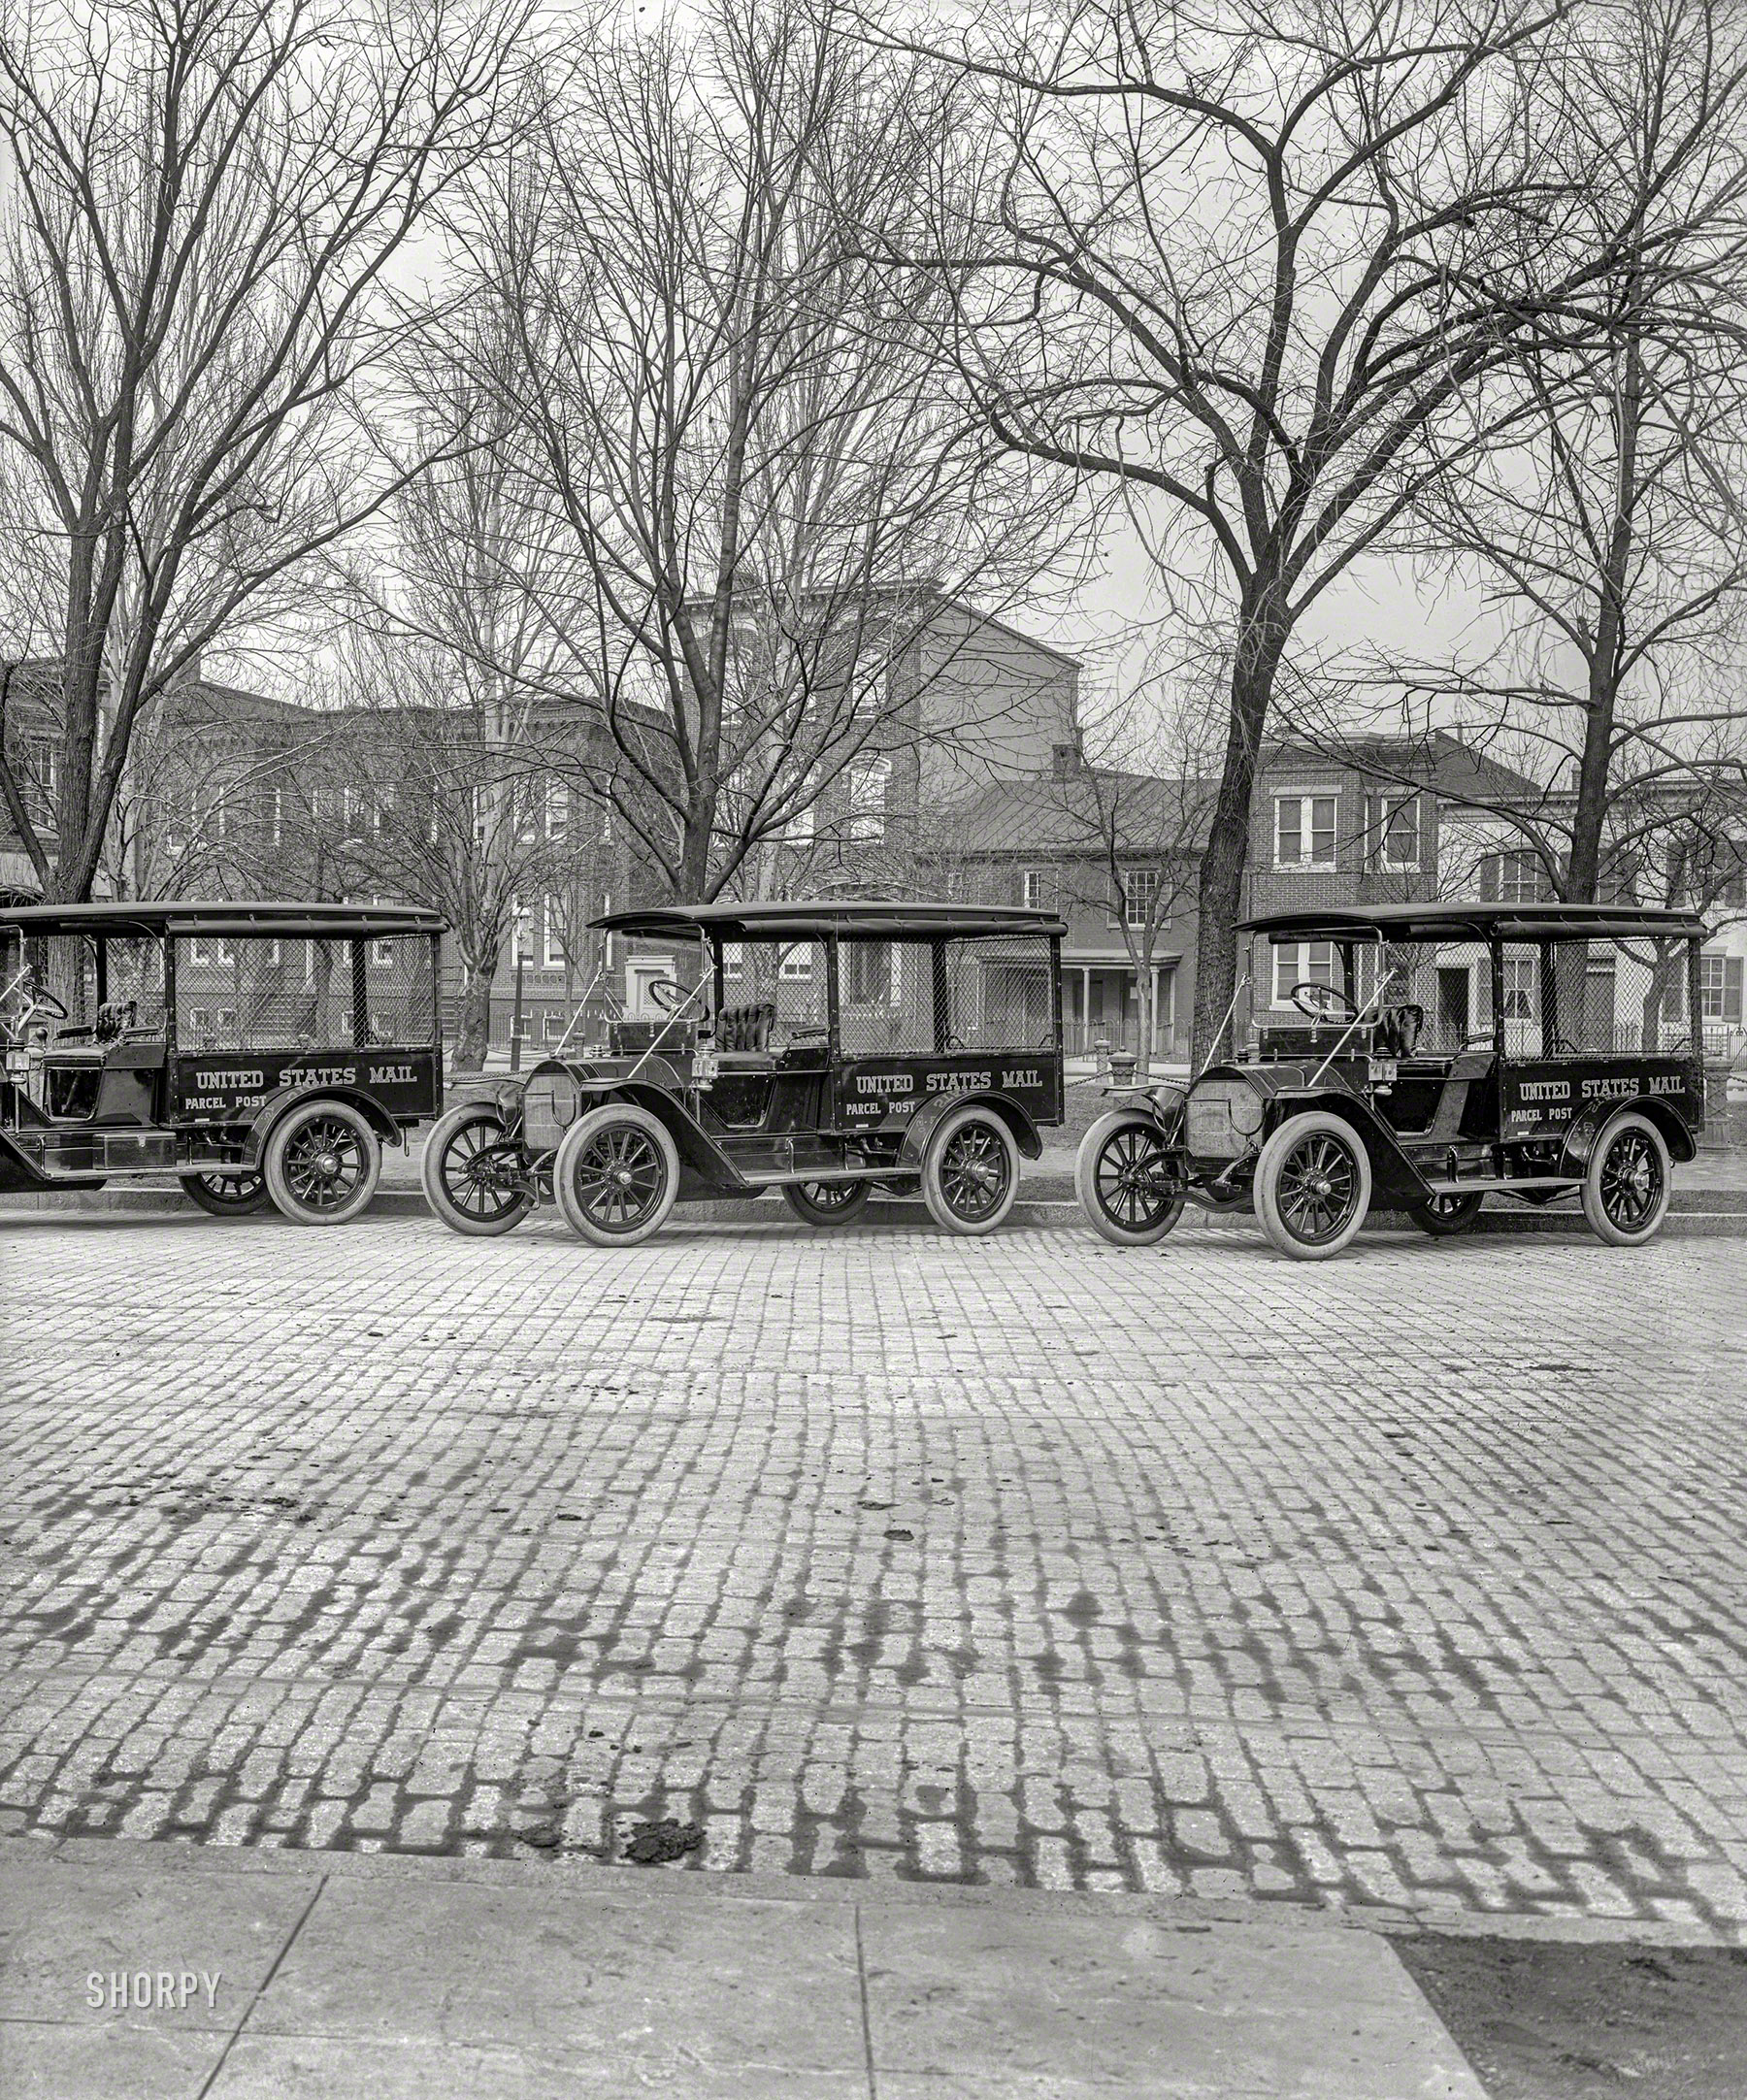 Washington, D.C., circa 1917. "U.S. Mail trucks -- Parcel Post delivery." National Photo Company Collection glass negative. View full size.